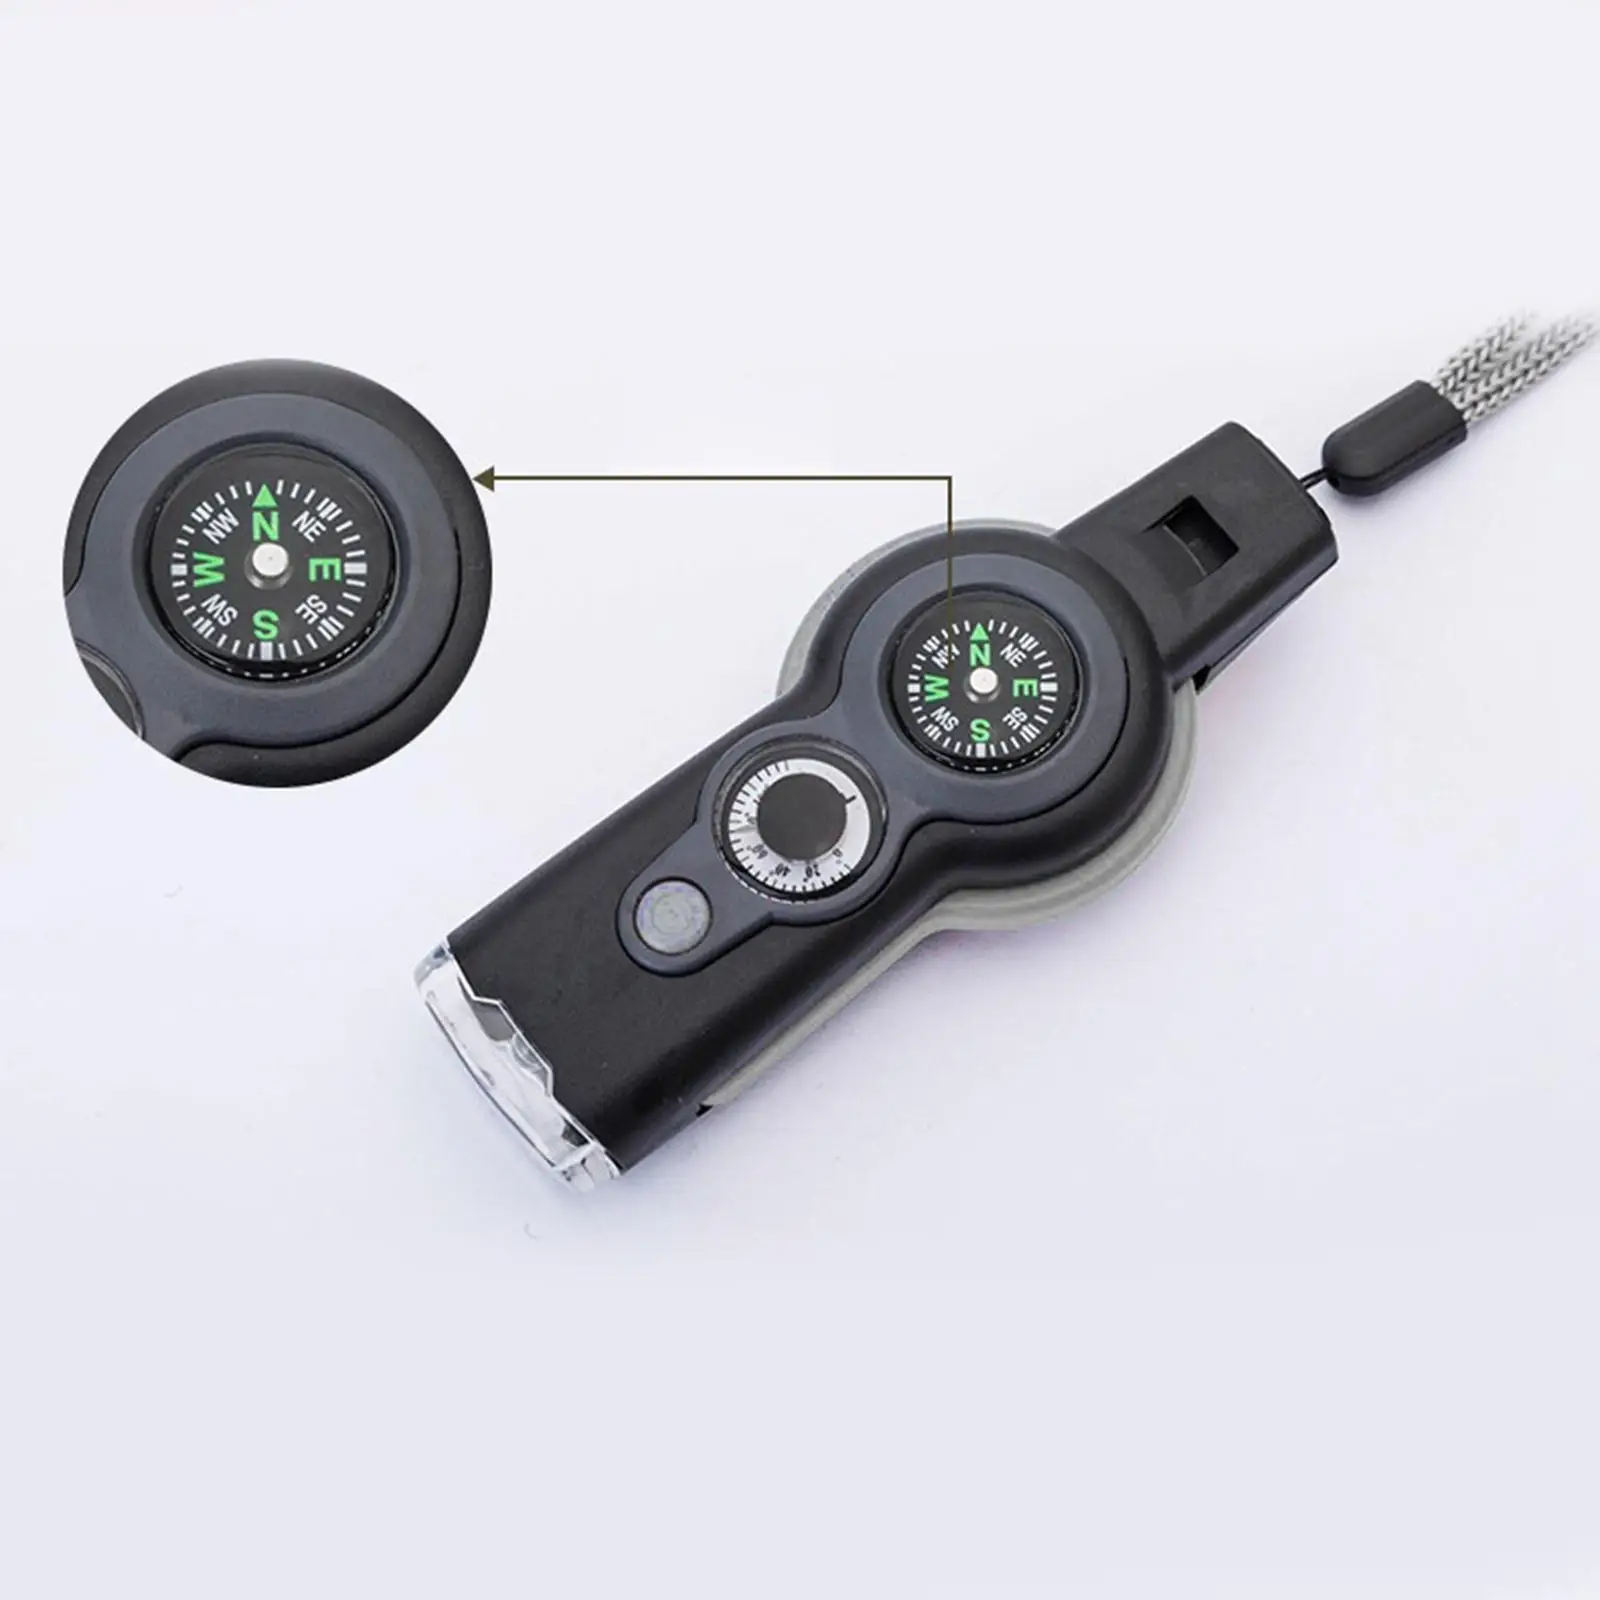  Survival Multi-function Emergency Tool Camping Hiking Accessory flashlight 